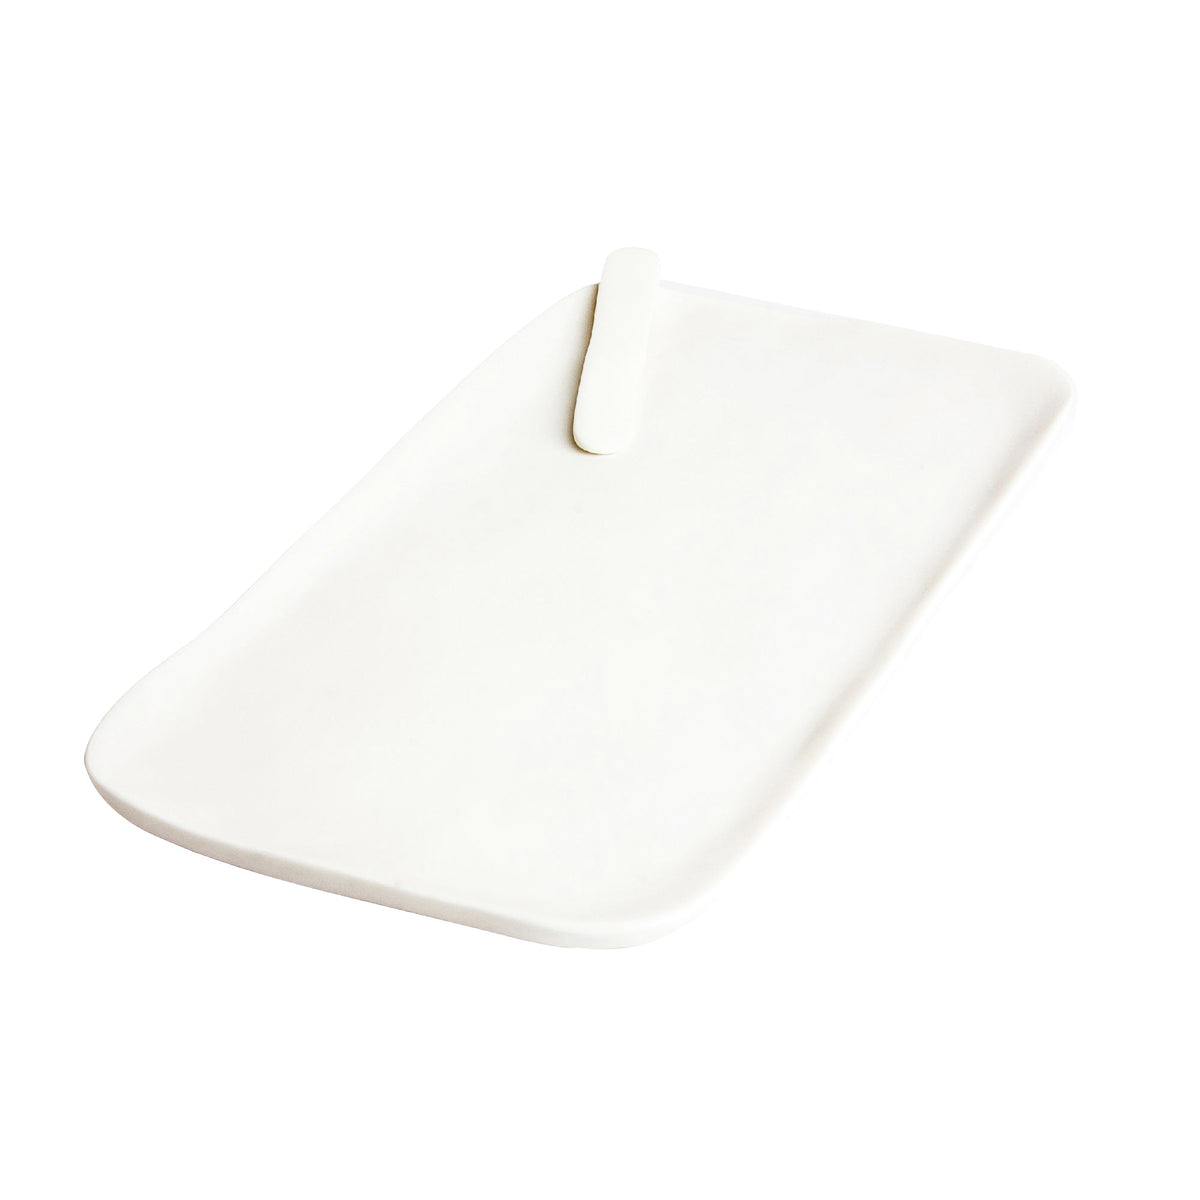 Large White Serving Board with Cheese Spreader